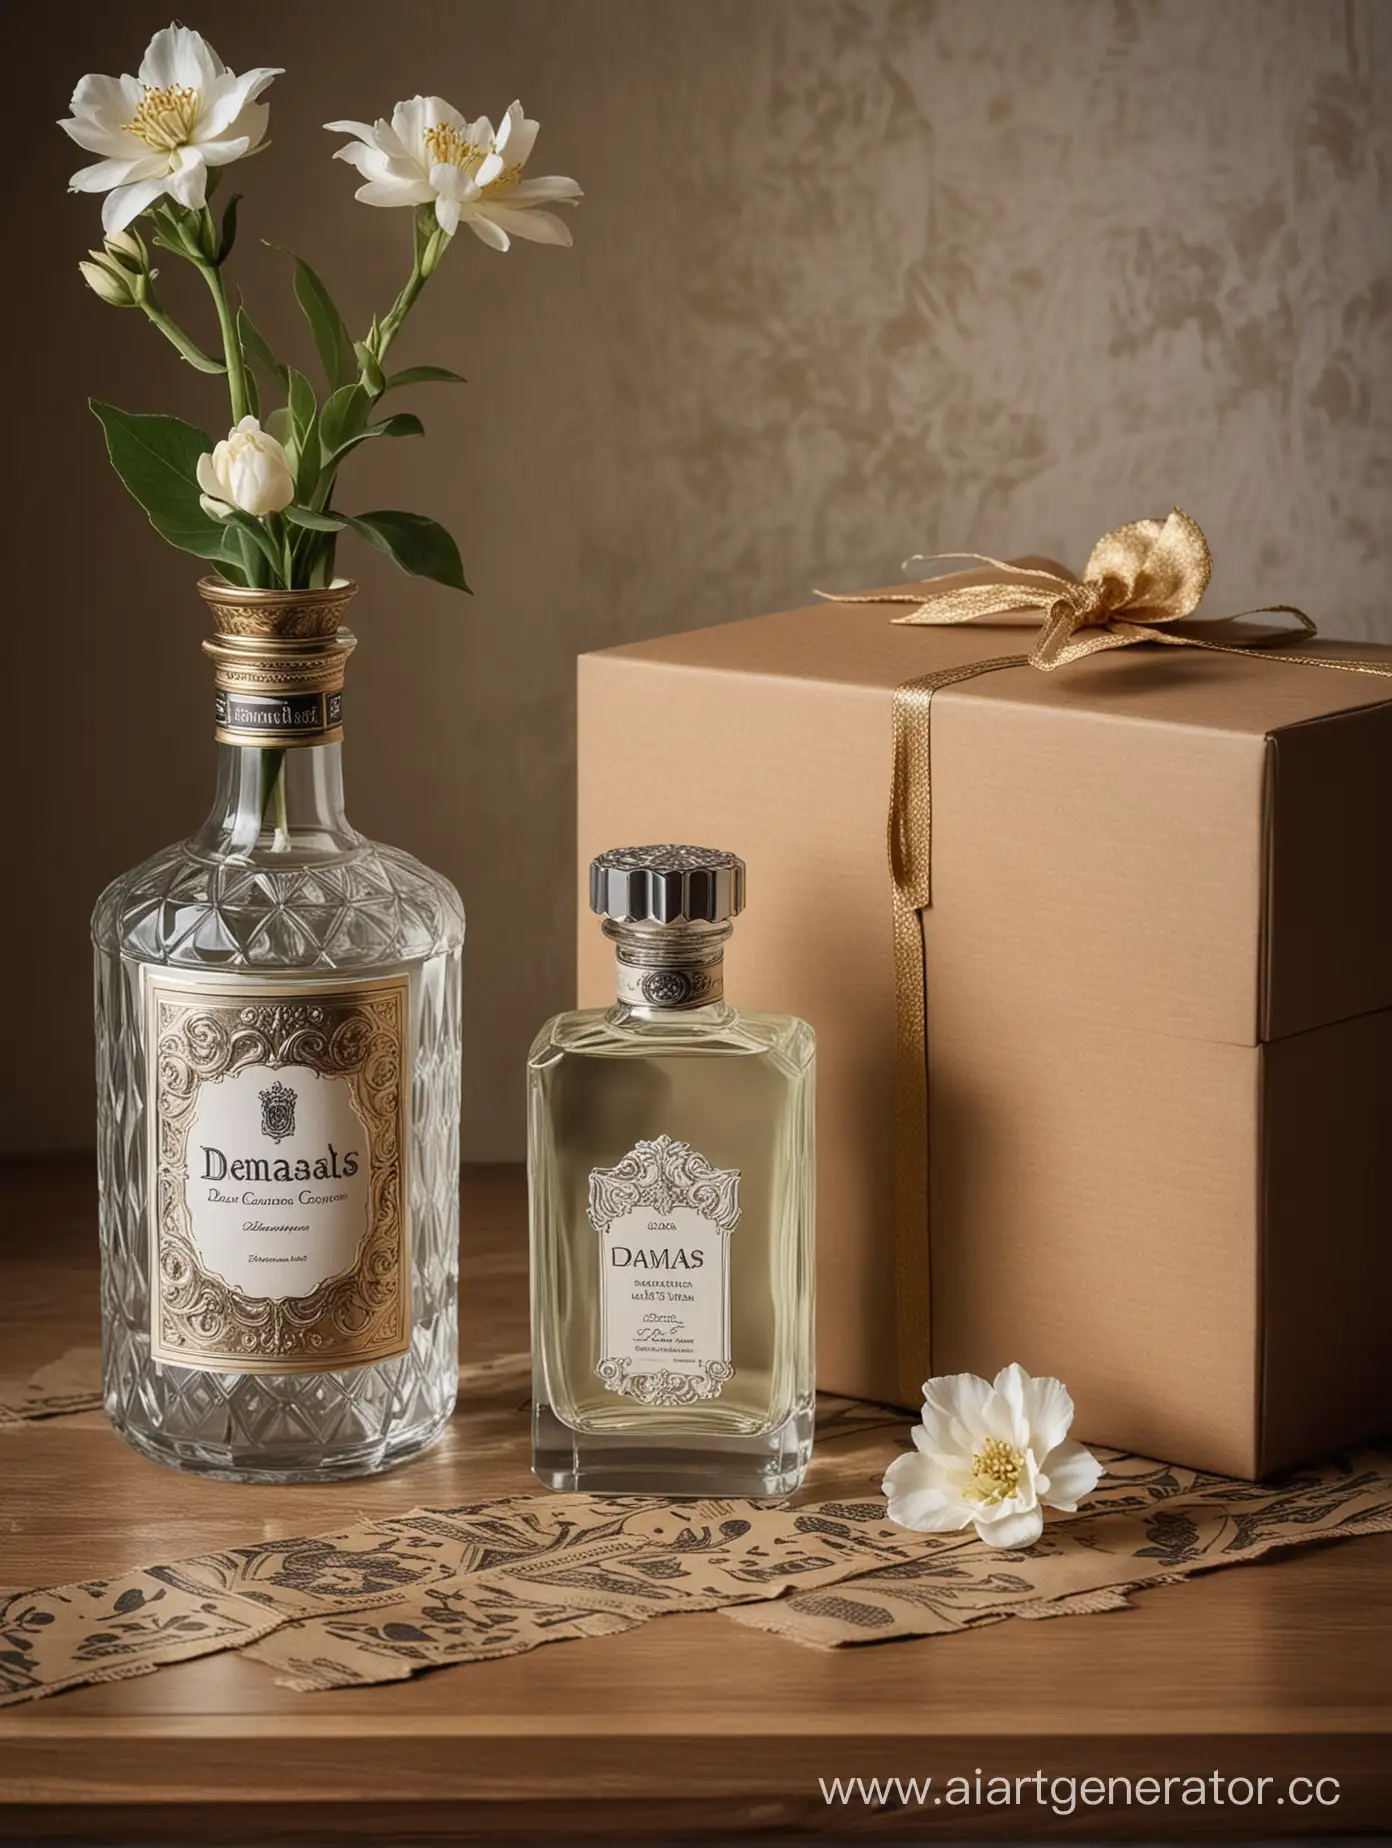 Damas-Cologne-Bottle-and-Box-with-Flemish-Baroque-Art-Instagram-Contest-Winning-DaualSet